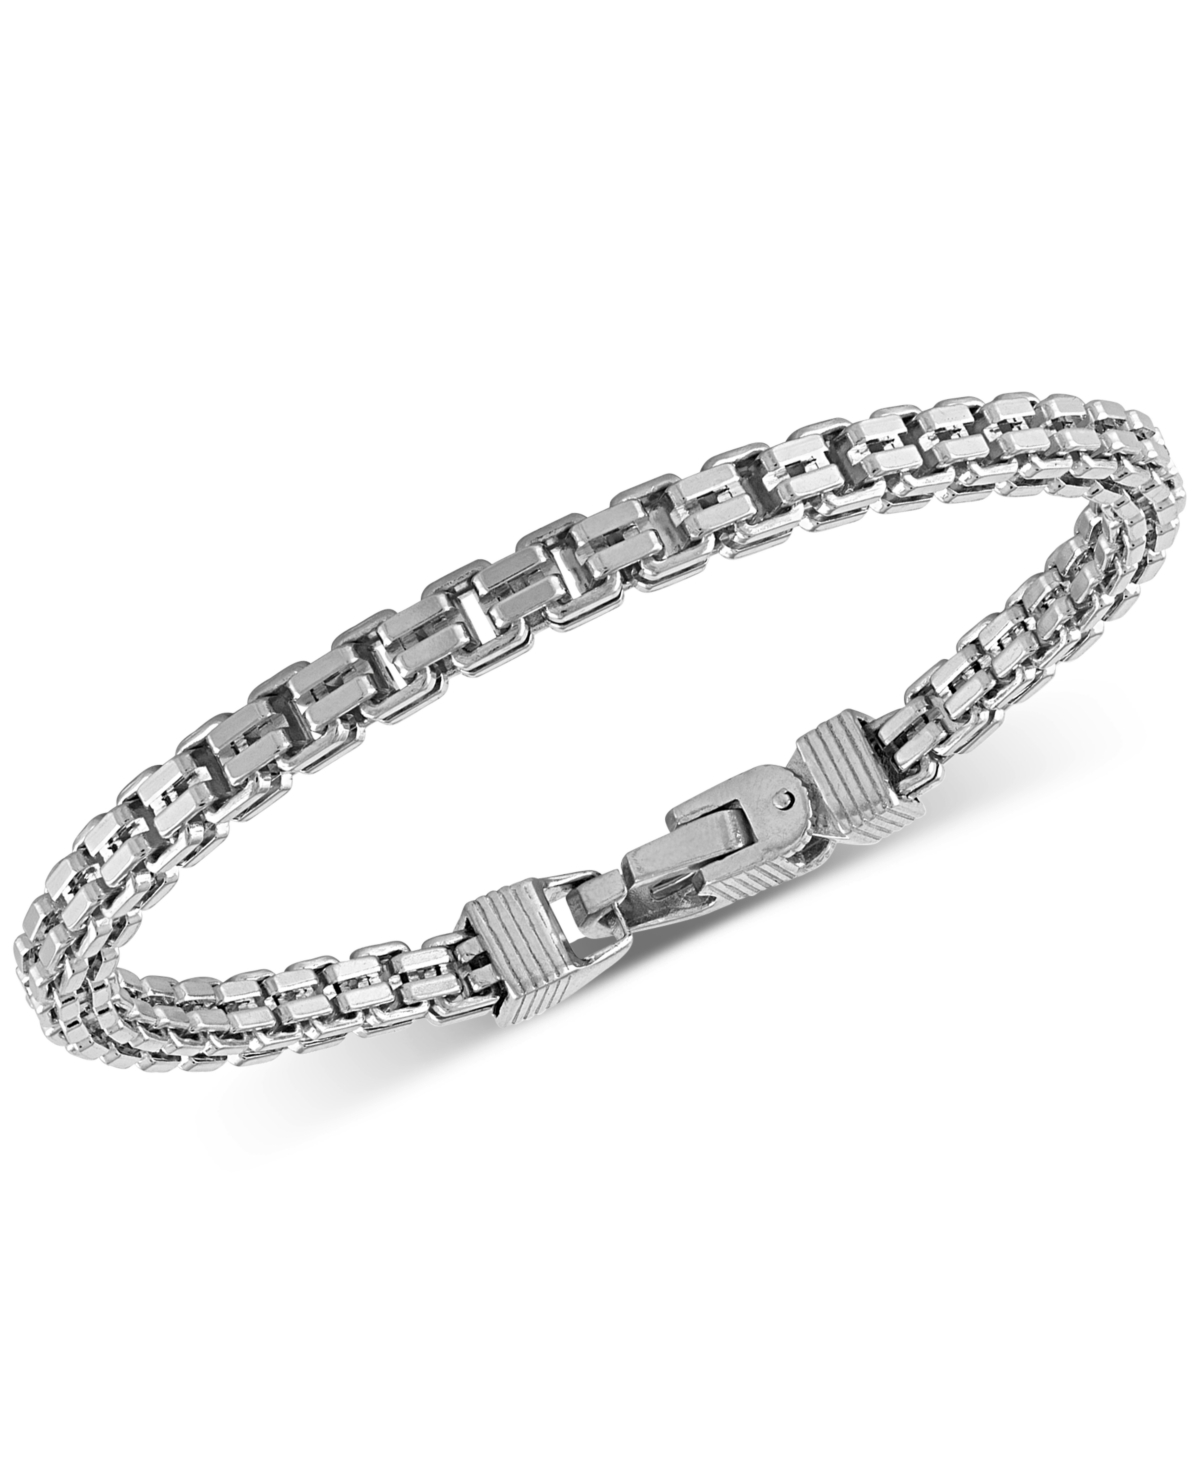 Double Box Link Bracelet in Sterling Silver, Created for Macy's - Sterling Silver